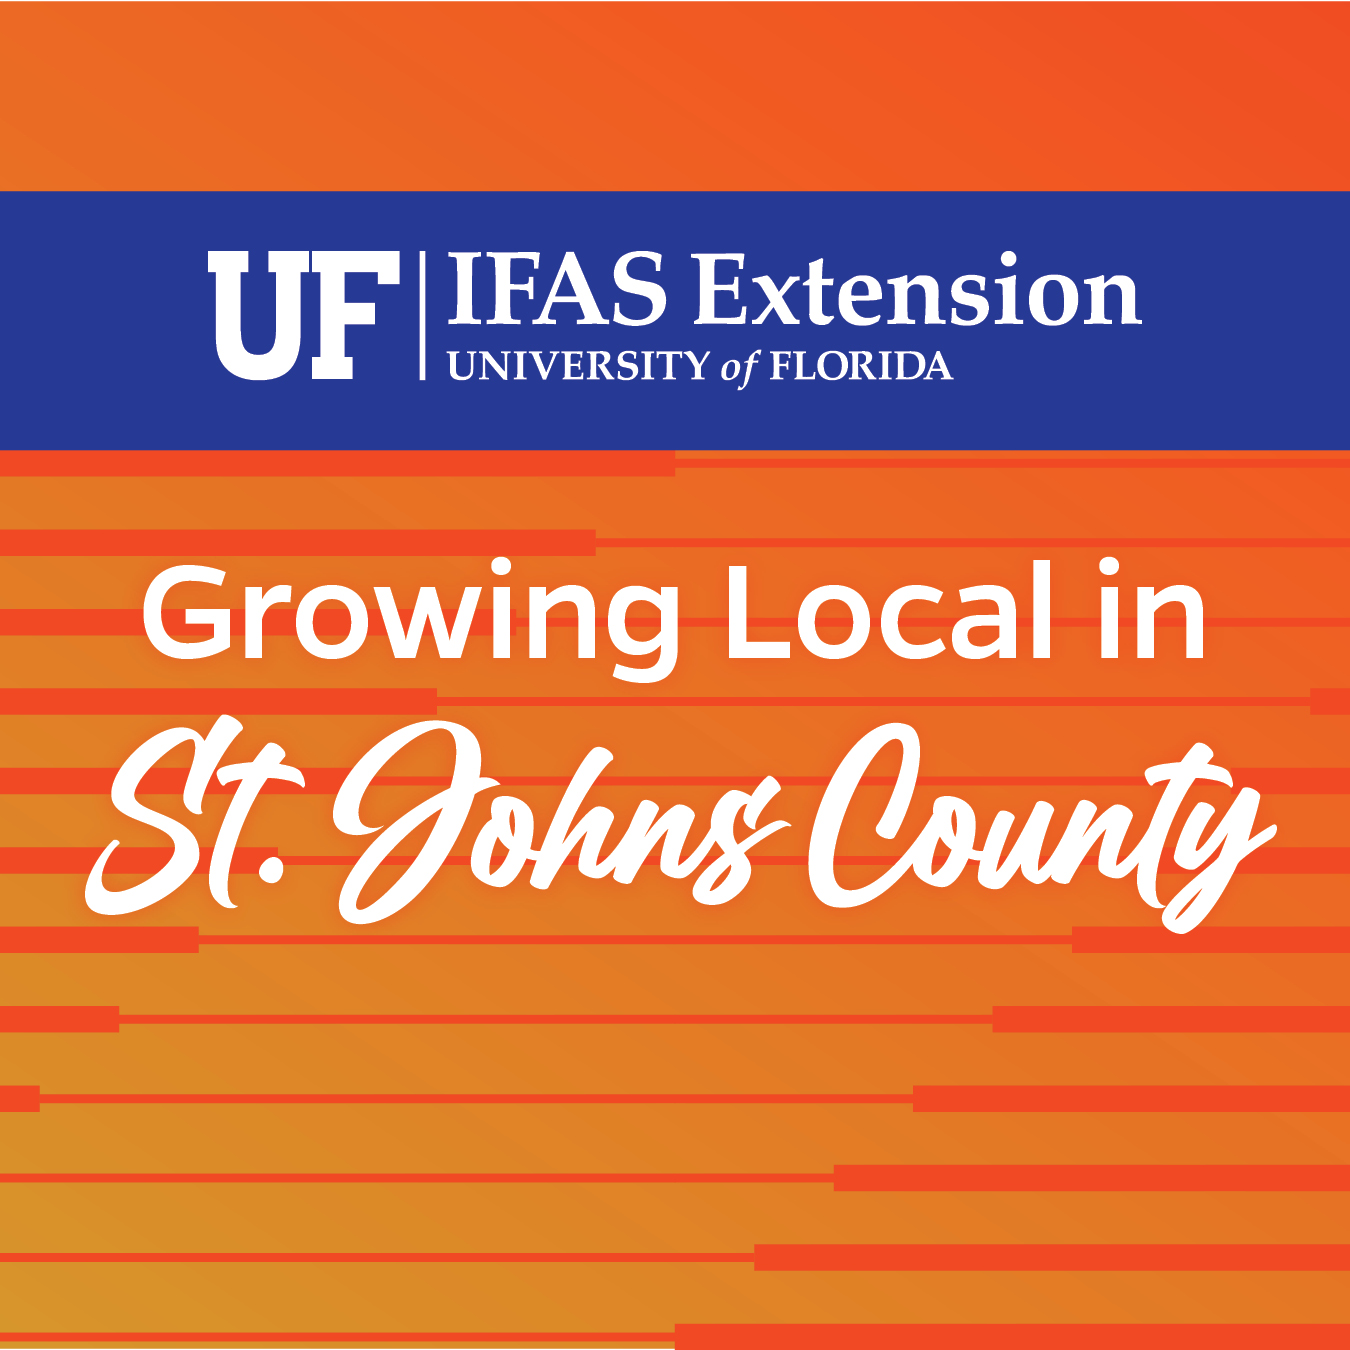 Growing Local in St. Johns County A New Event in October! UF/IFAS